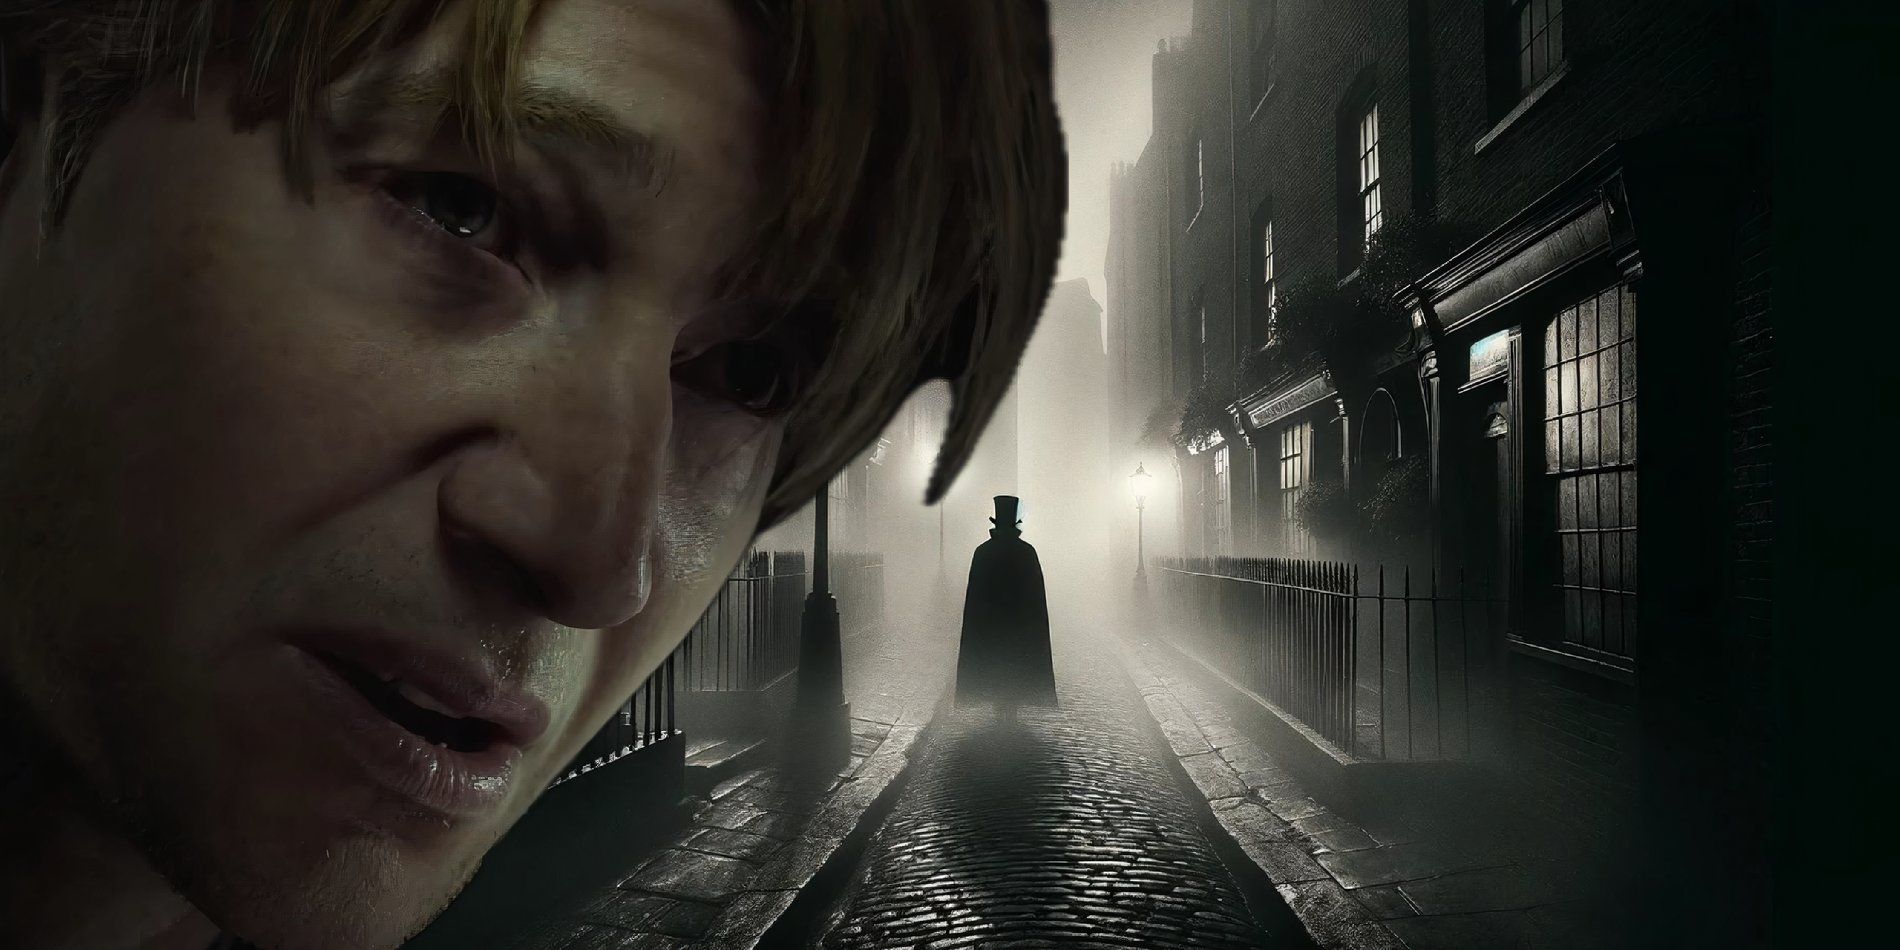 James Sunderland Looks Distressed With A Silhouette Of Jack The Ripper Behind Him